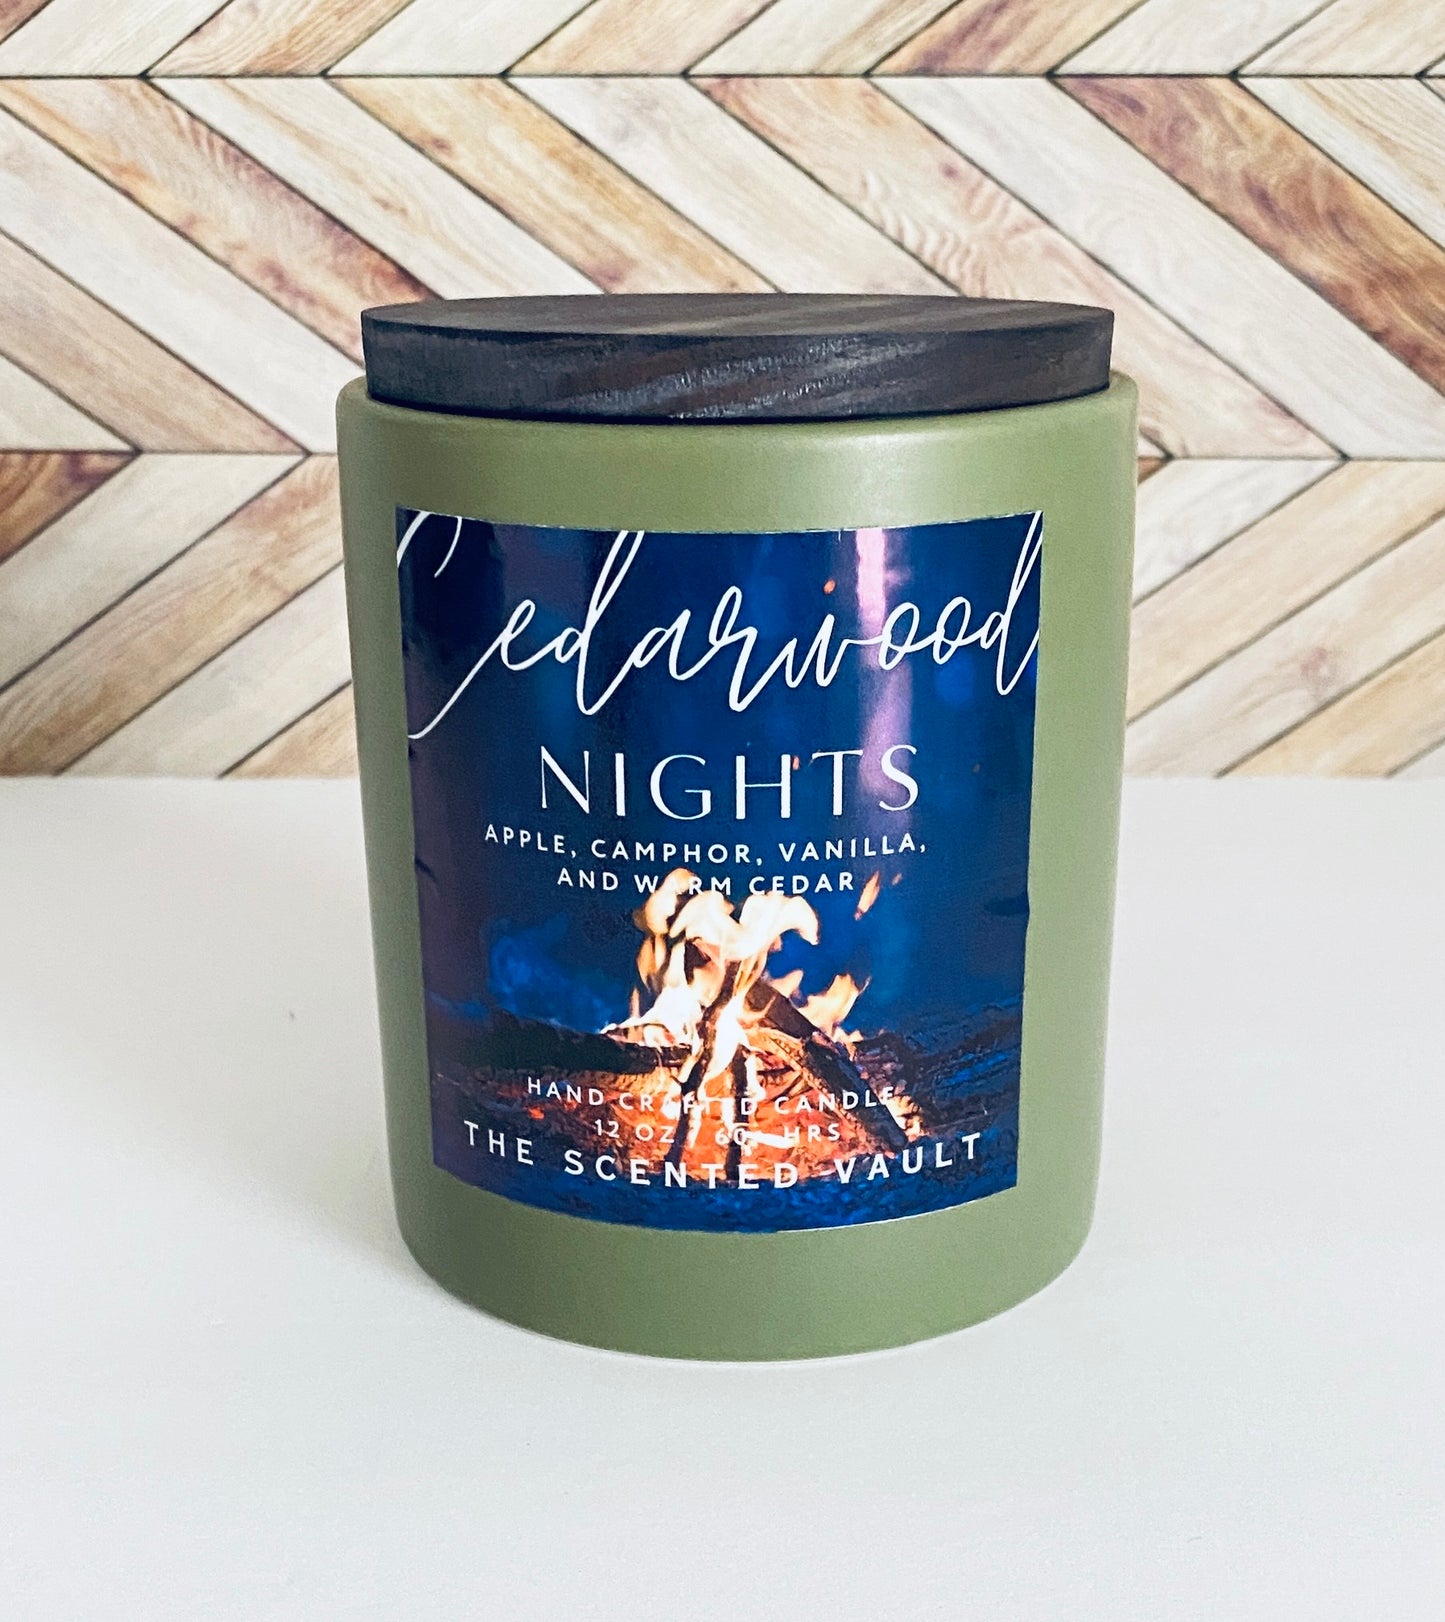 Cedarwood Nights Scented Candle